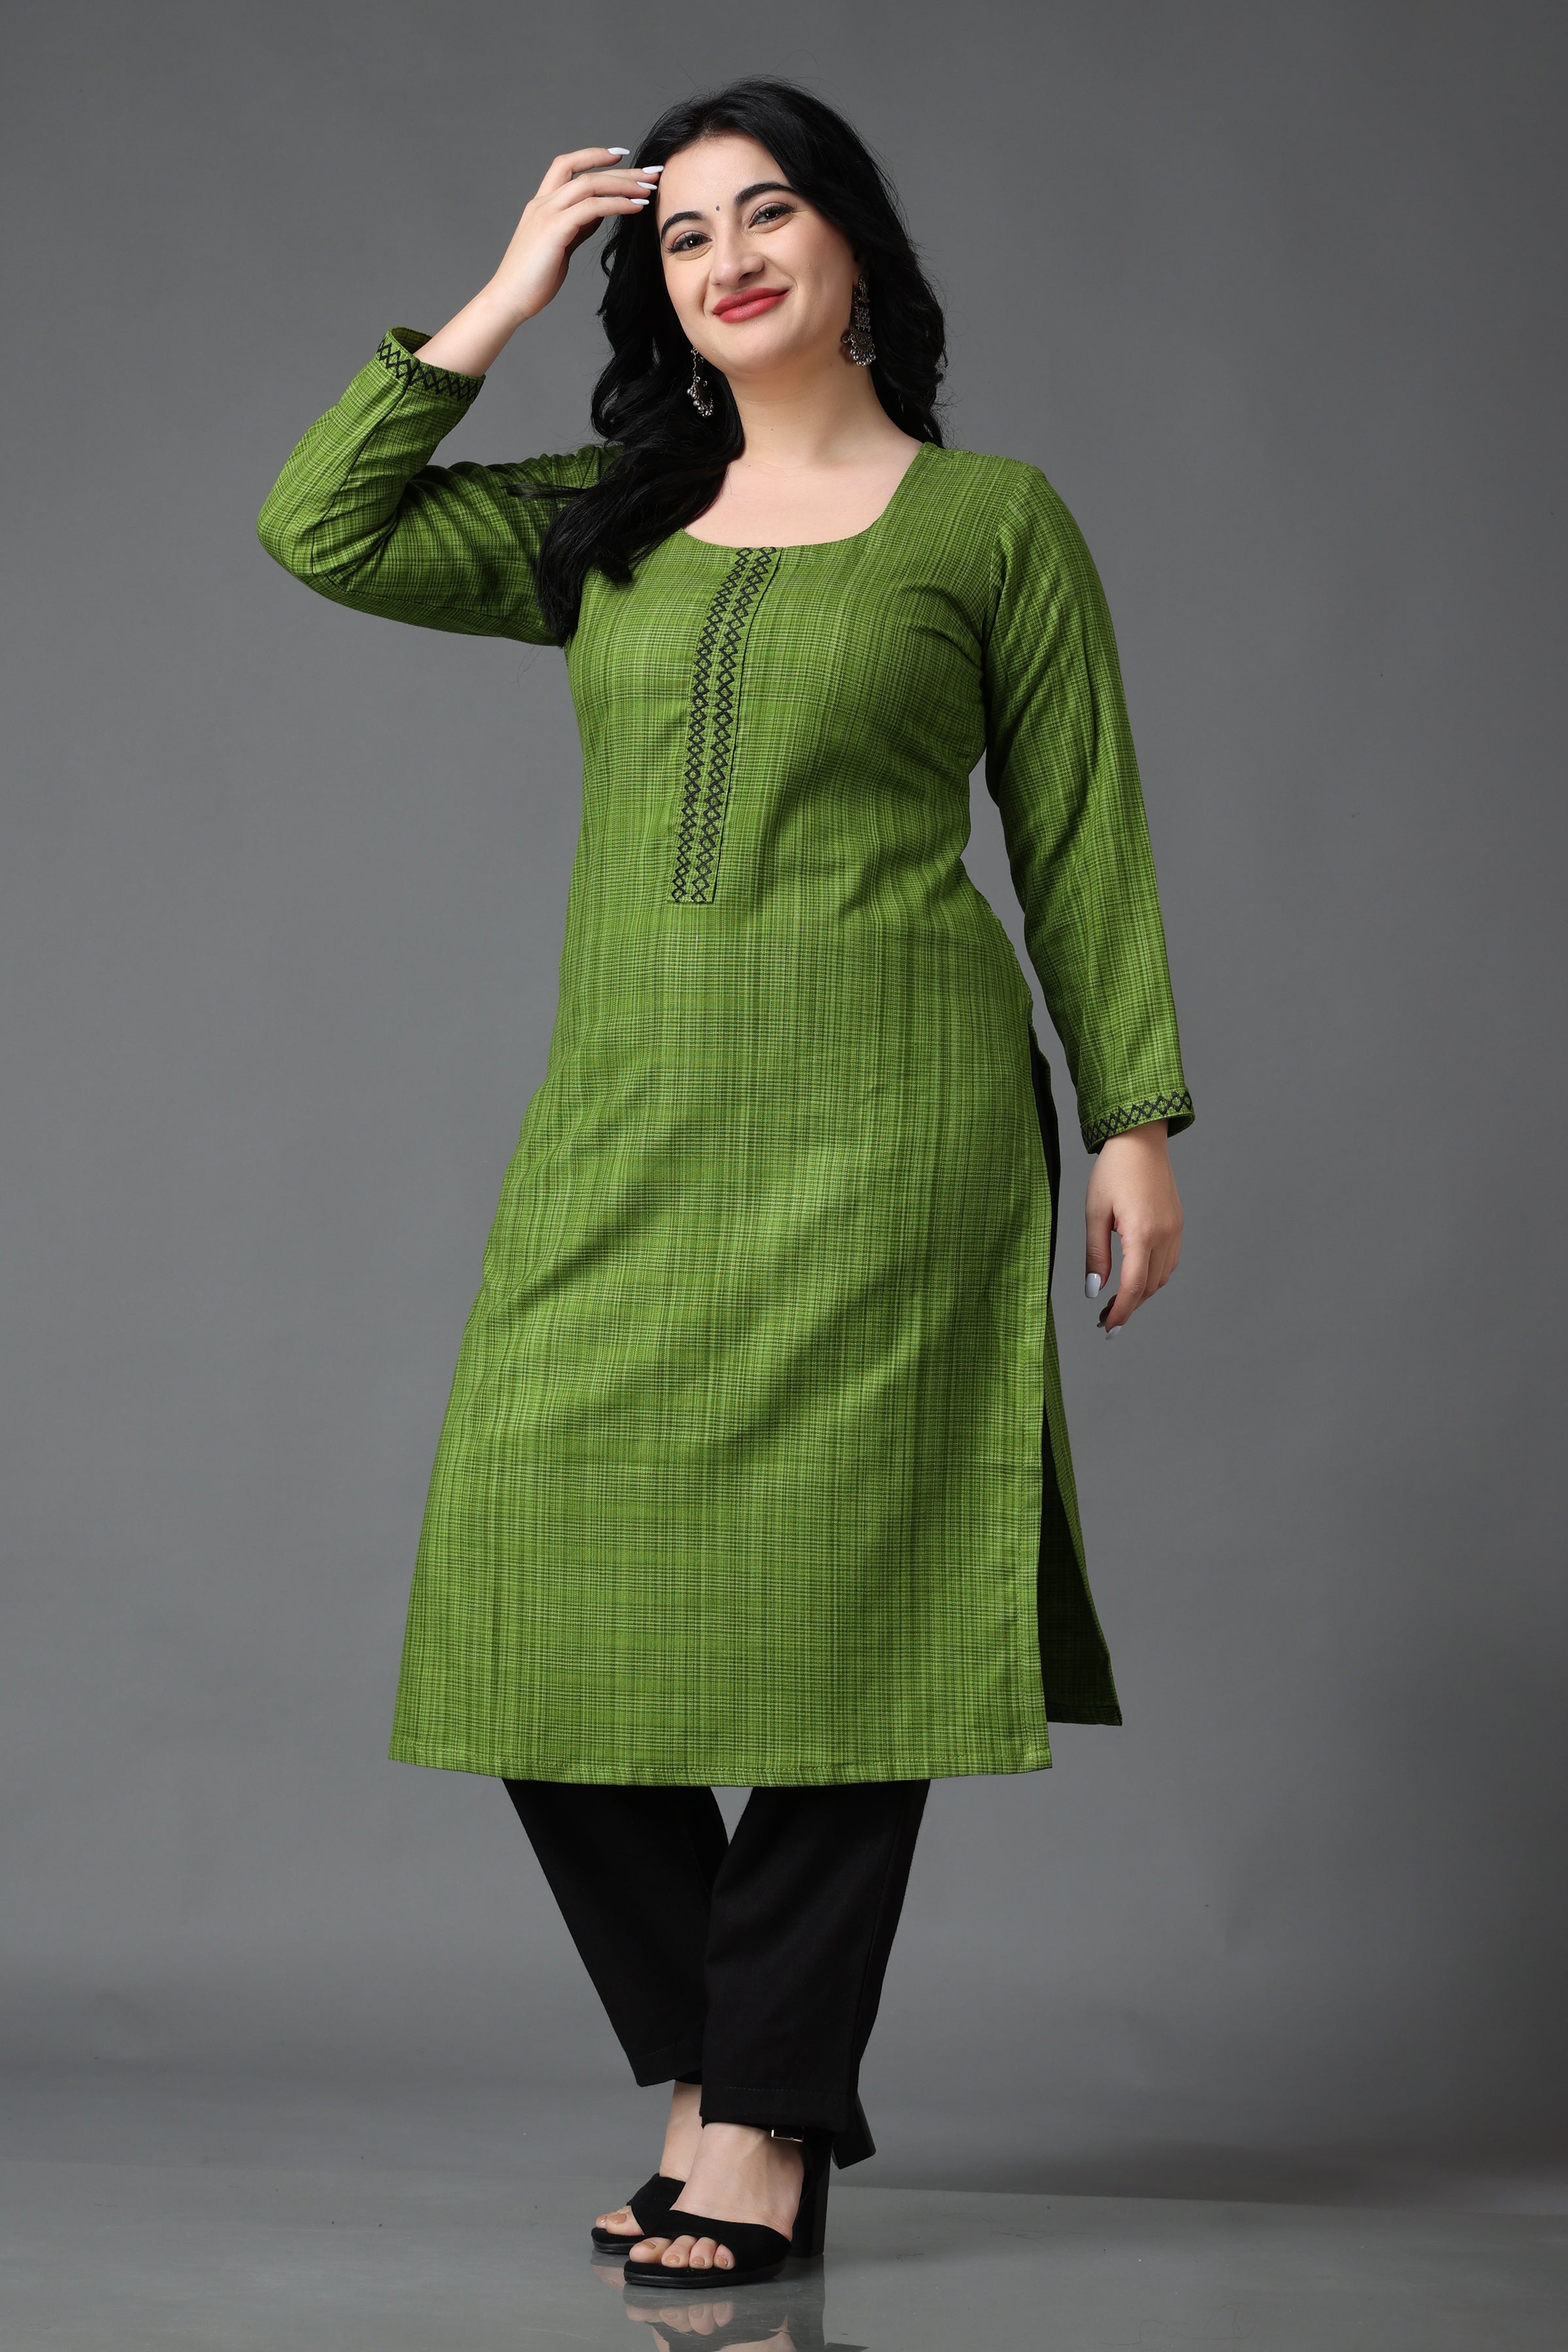 Buy Kabello Woolen Kurtis for Women Winter with Hand Embroidery (Black) at  Amazon.in